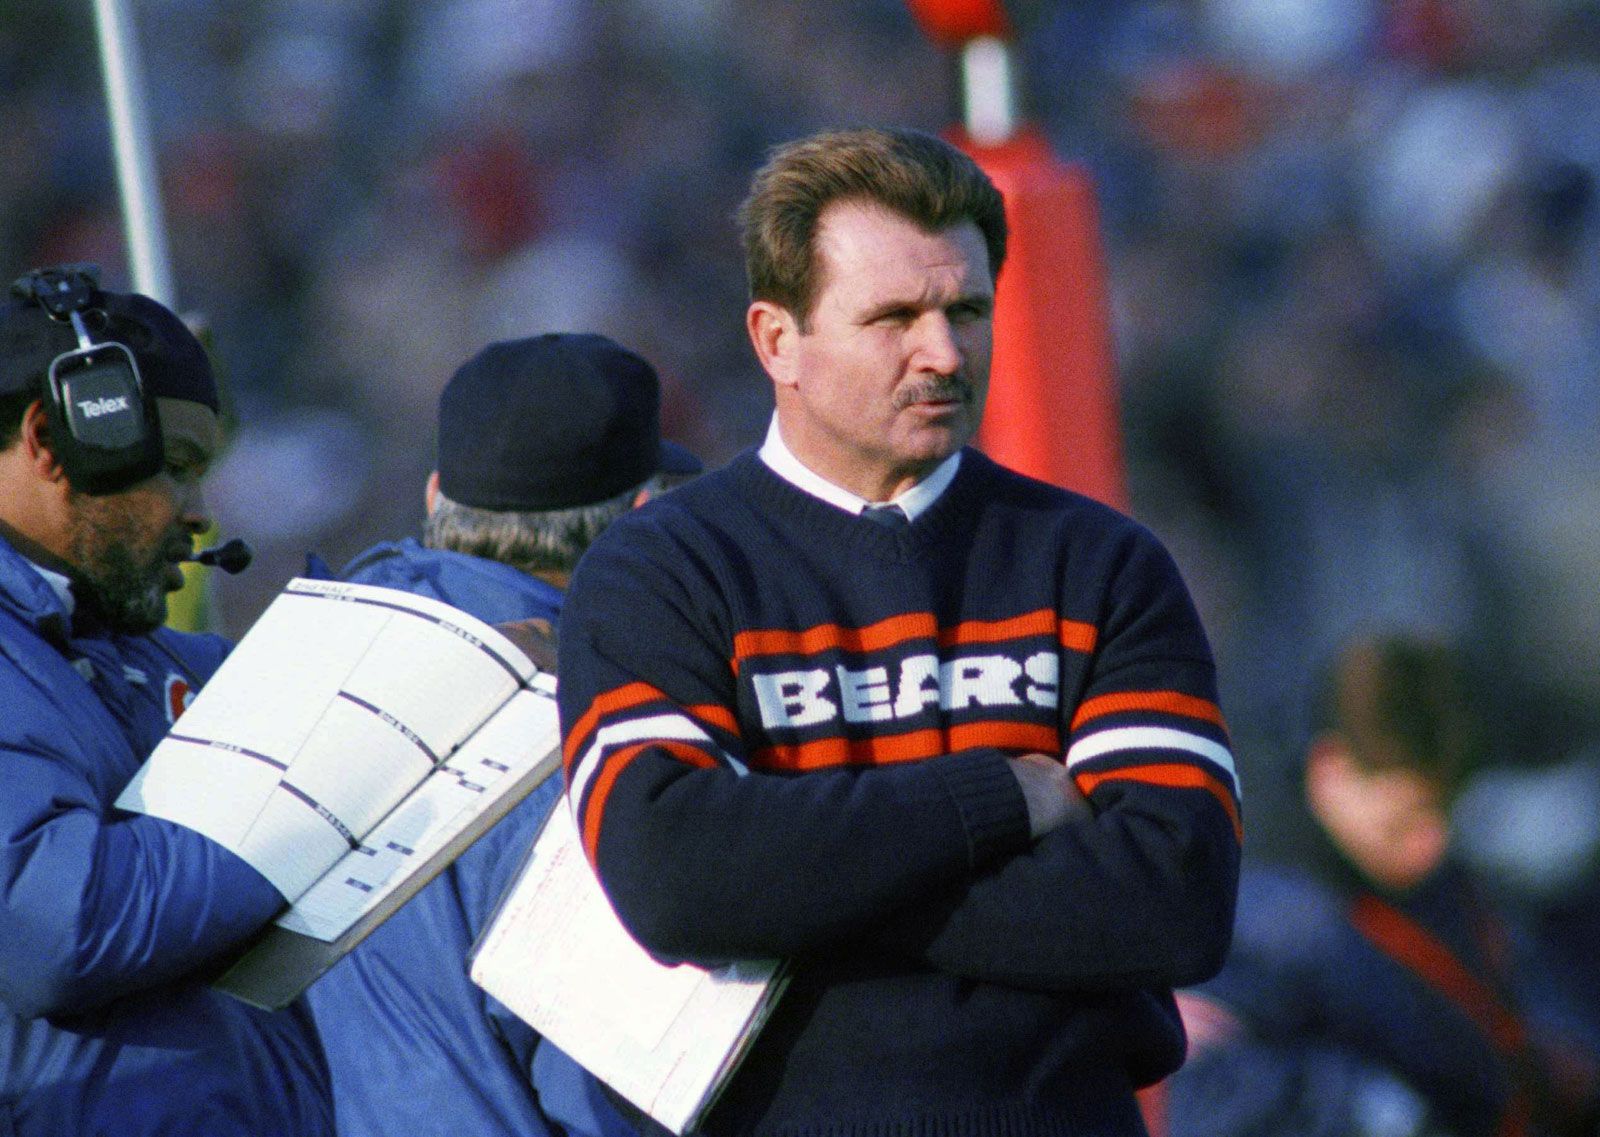 Mike-Ditka-Chicago-Bears-Coach-1985.jpg